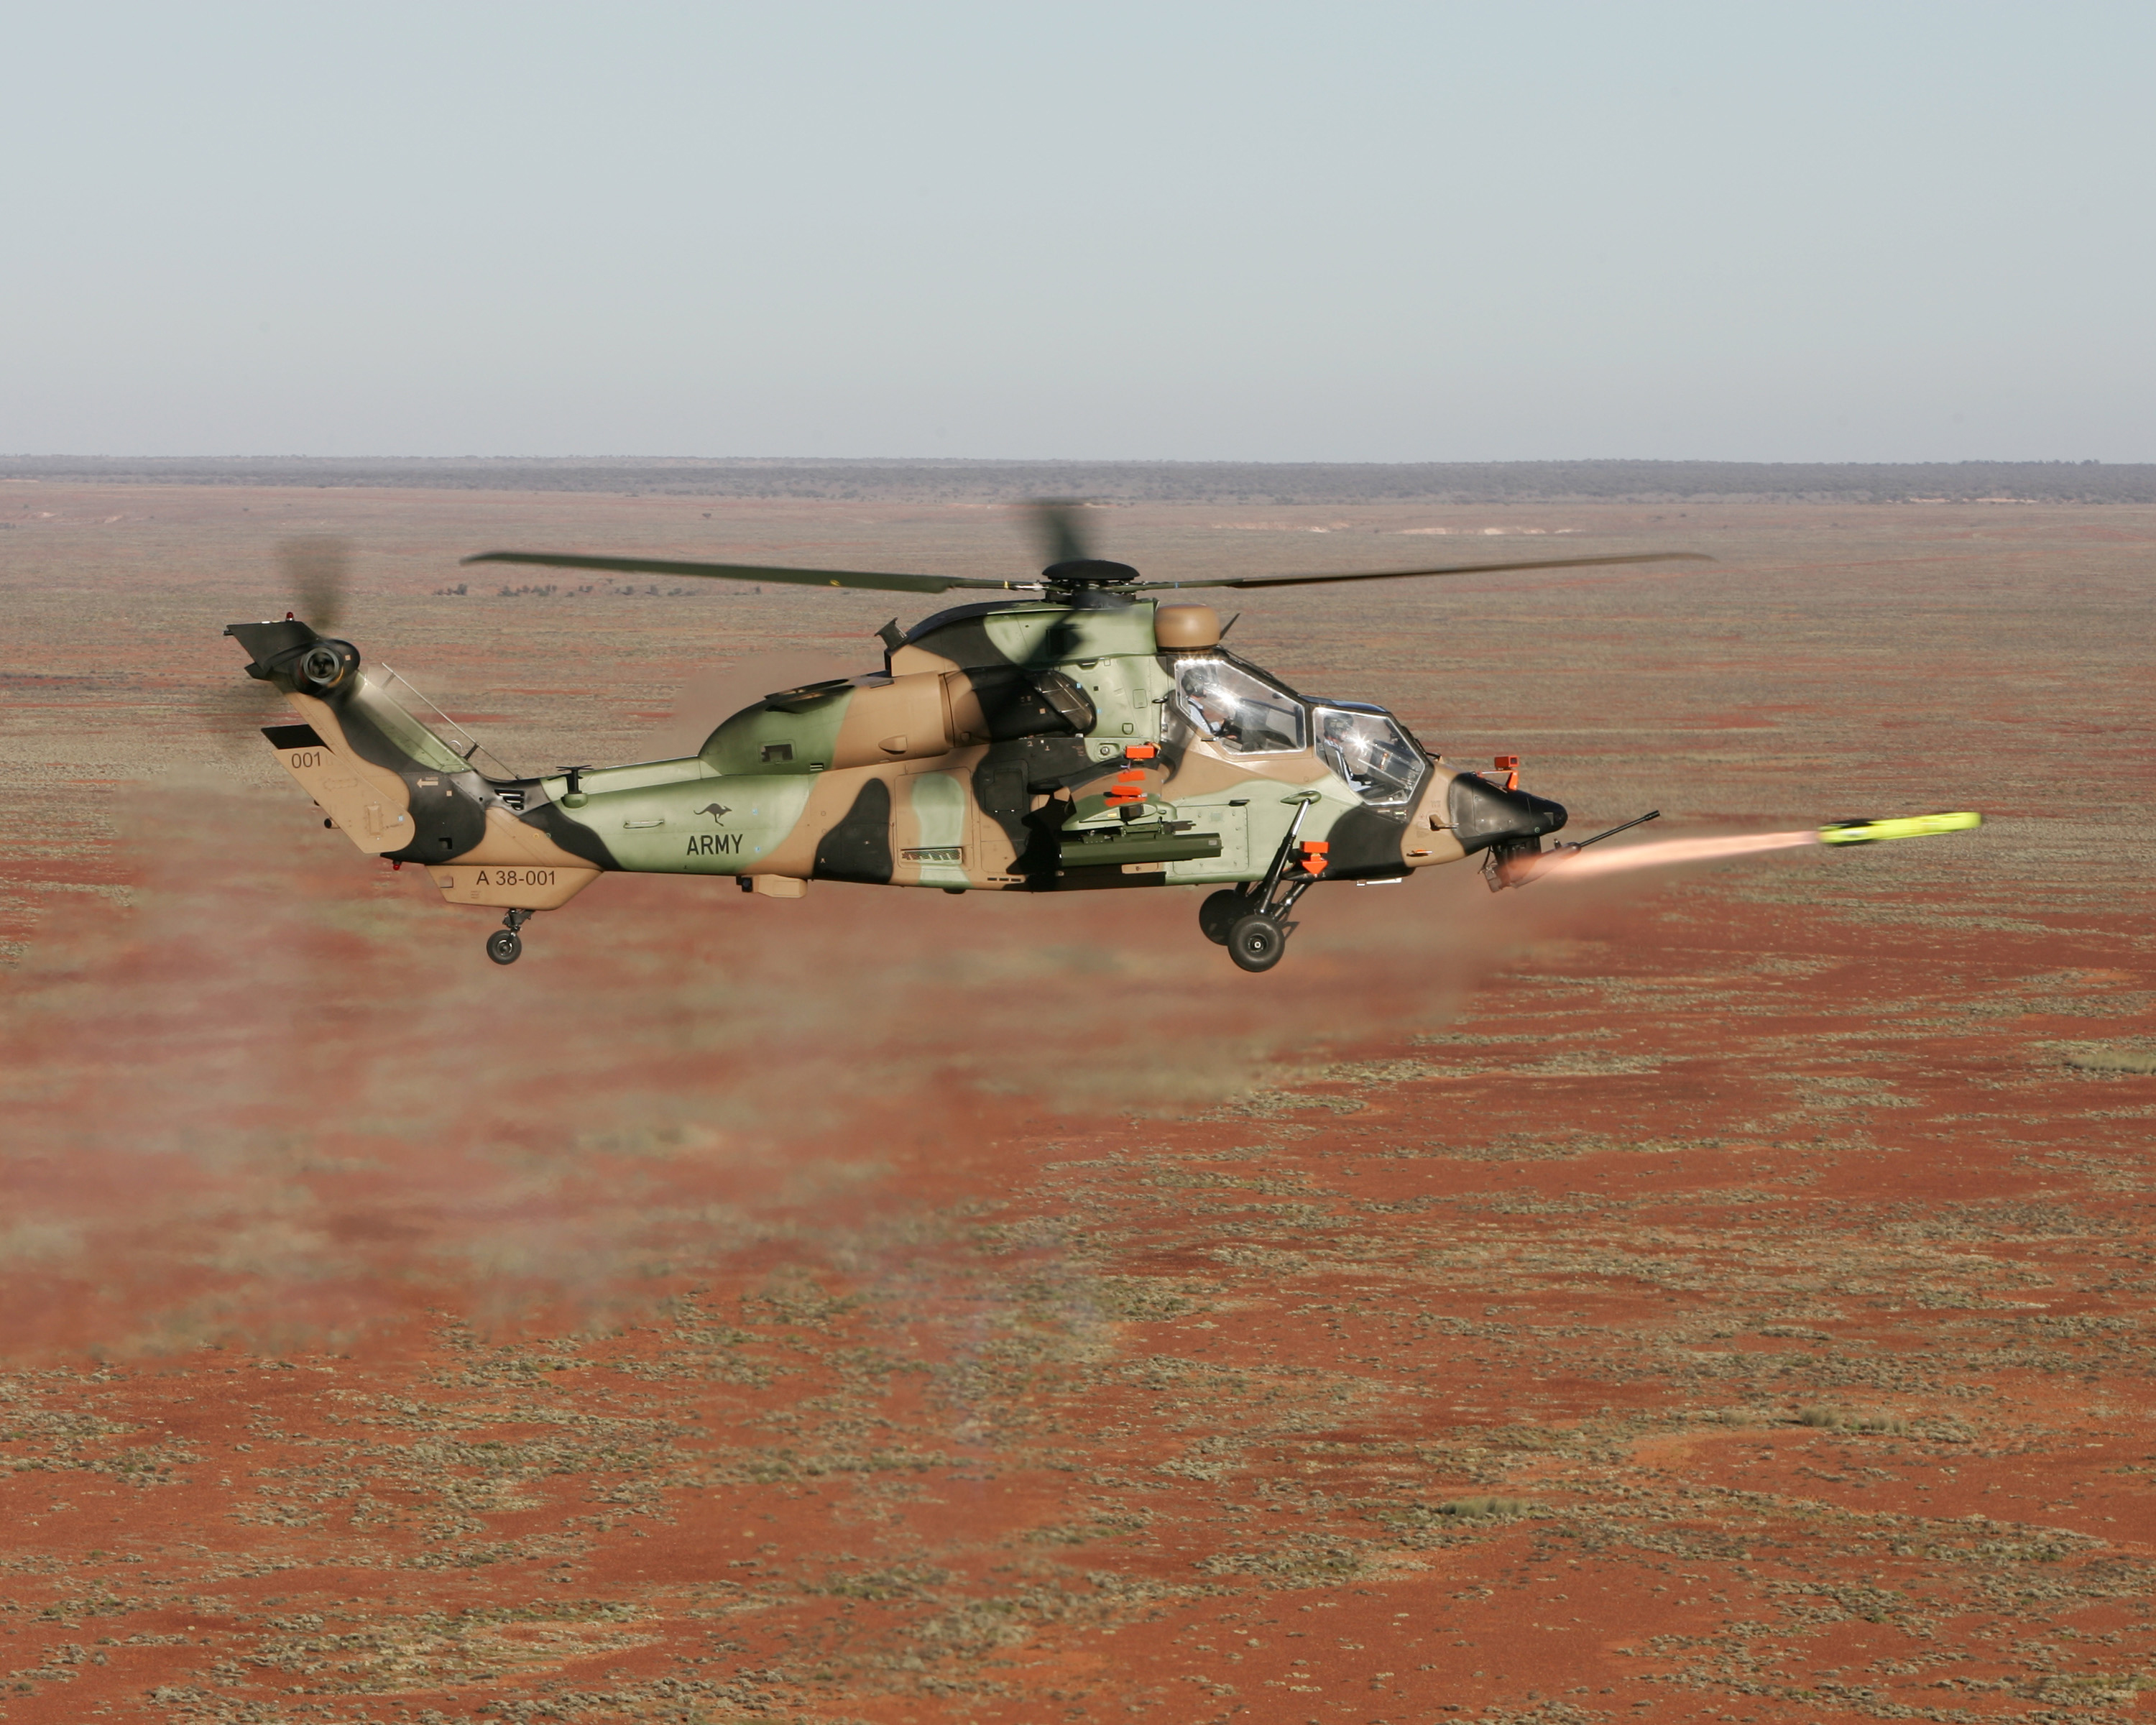 aircraft, Helicopters, Vehicles, Australian, Outback, Australian, Military Wallpaper